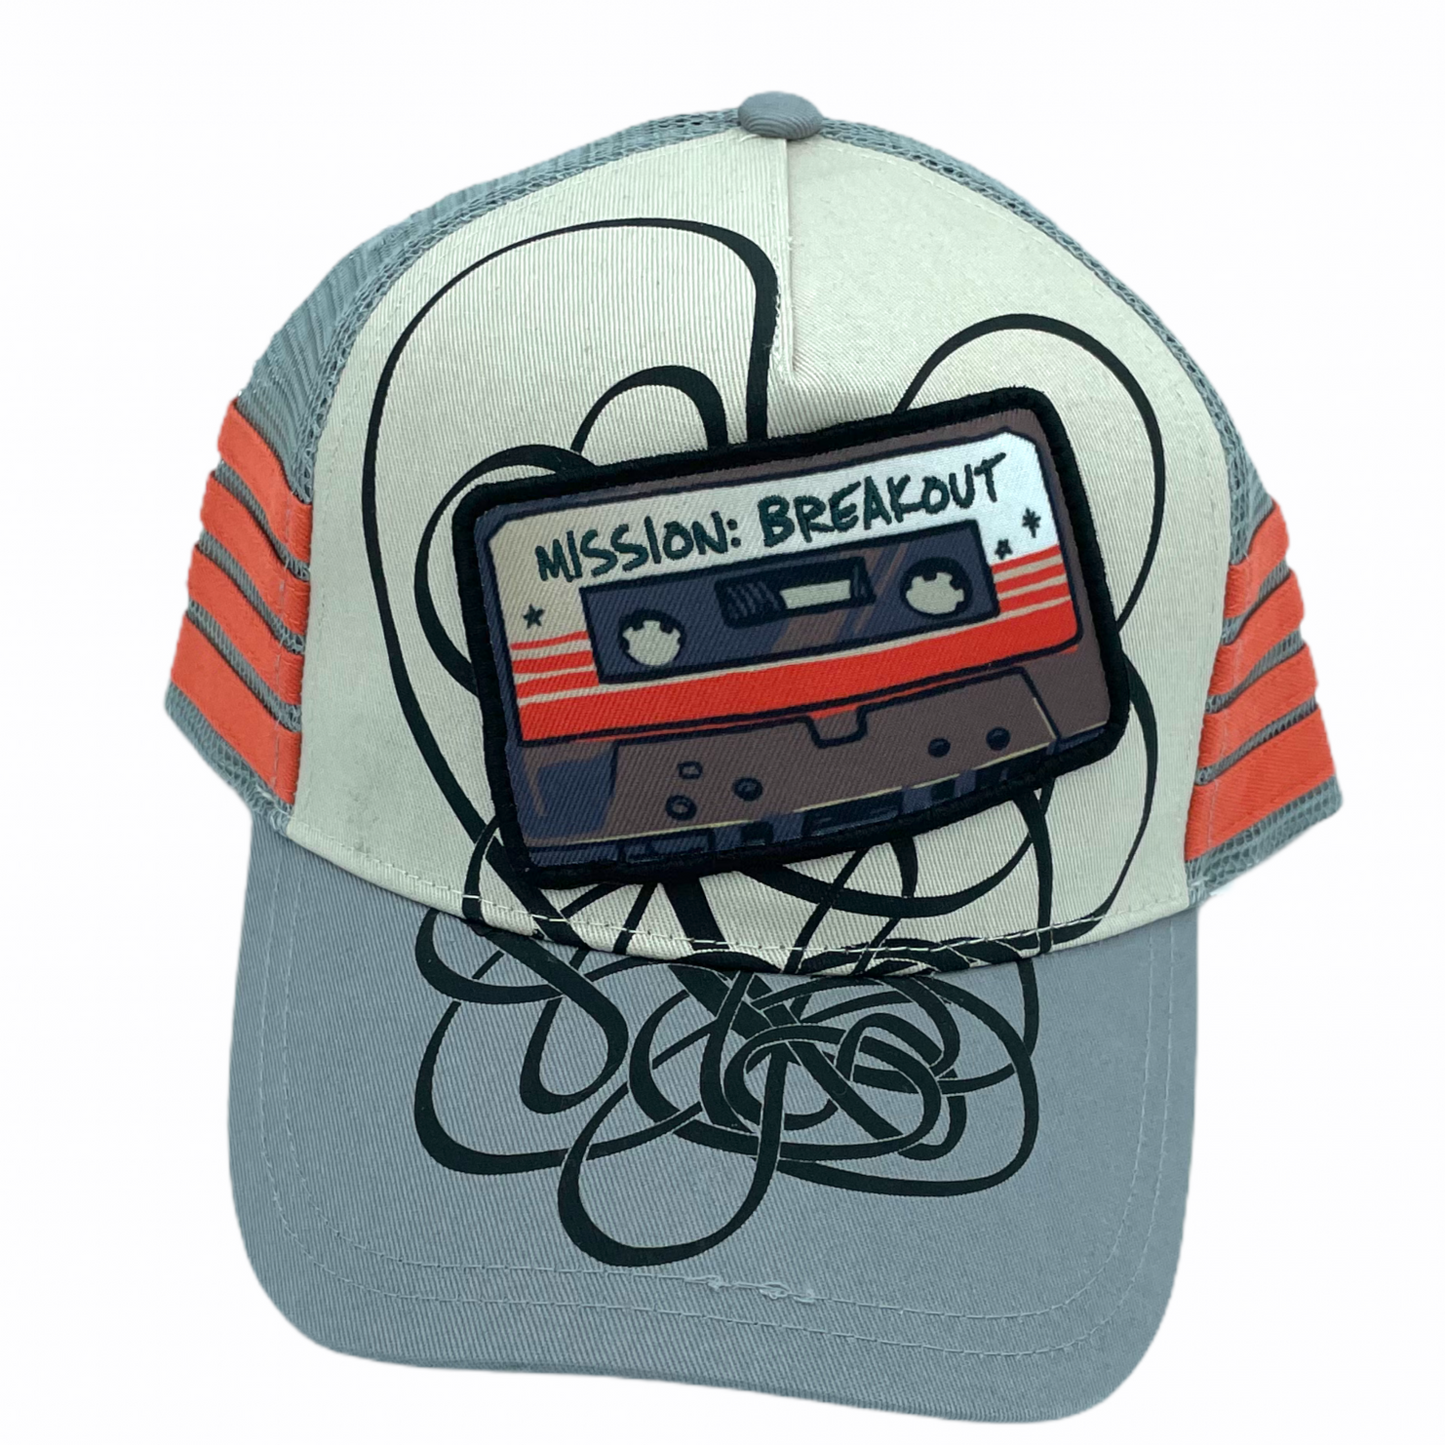 Marvel Guardians of the Galaxy: Mission Breakout Trucker Mesh Cap